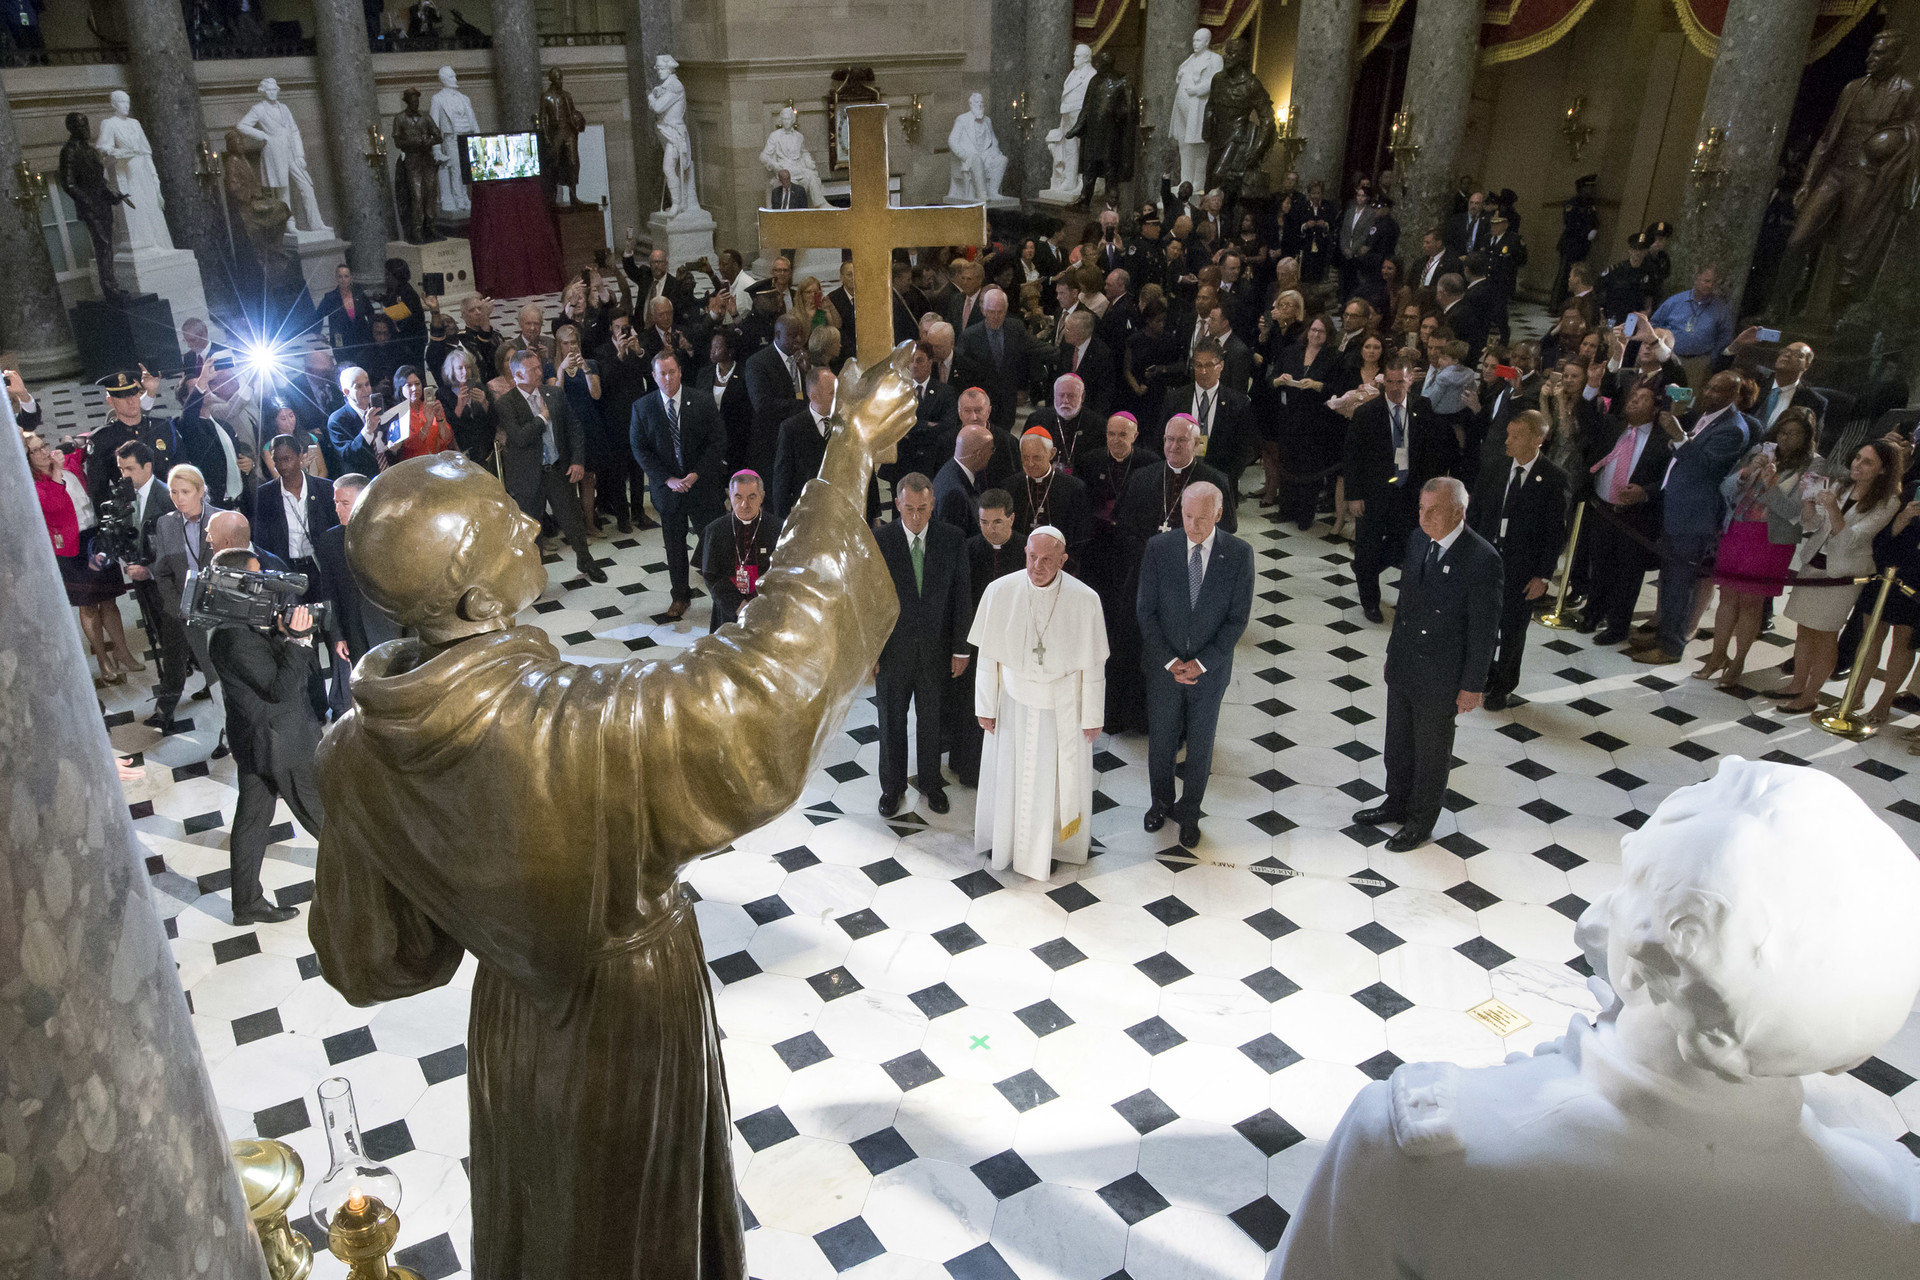 Pope Francis pauses in front of a sculpture of Spanish-born Junipero Serra, the Franciscan Friar known for starting missions in California, in Statuary Hall at the U.S. Capitol on September 24, 2015 in Washington, DC.